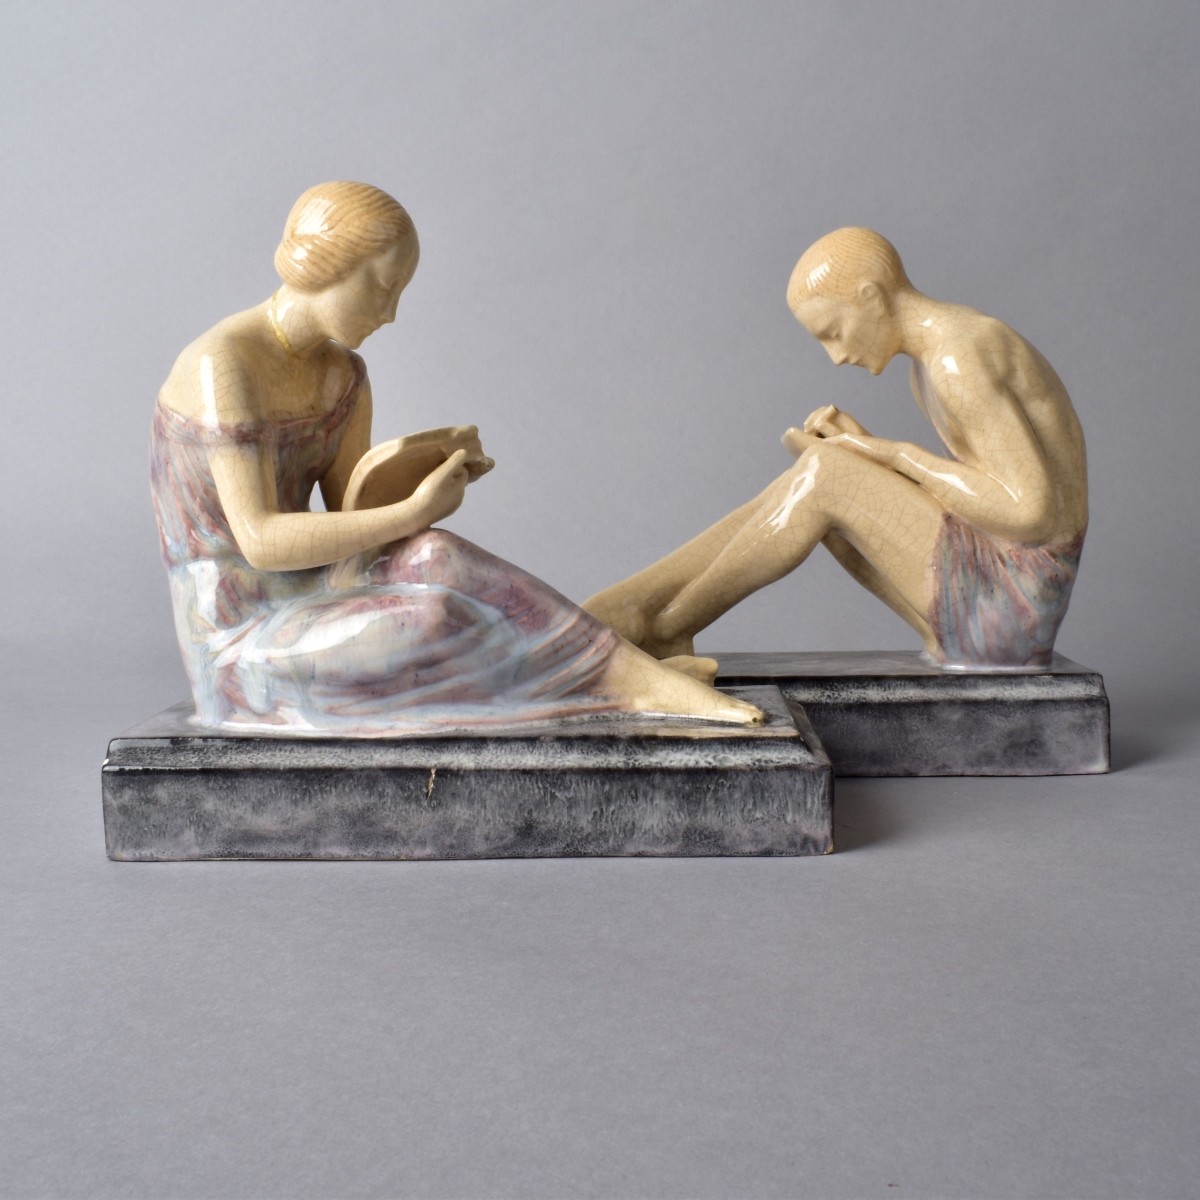 Pierre Le Faguays (French 1892-1962) Figurines